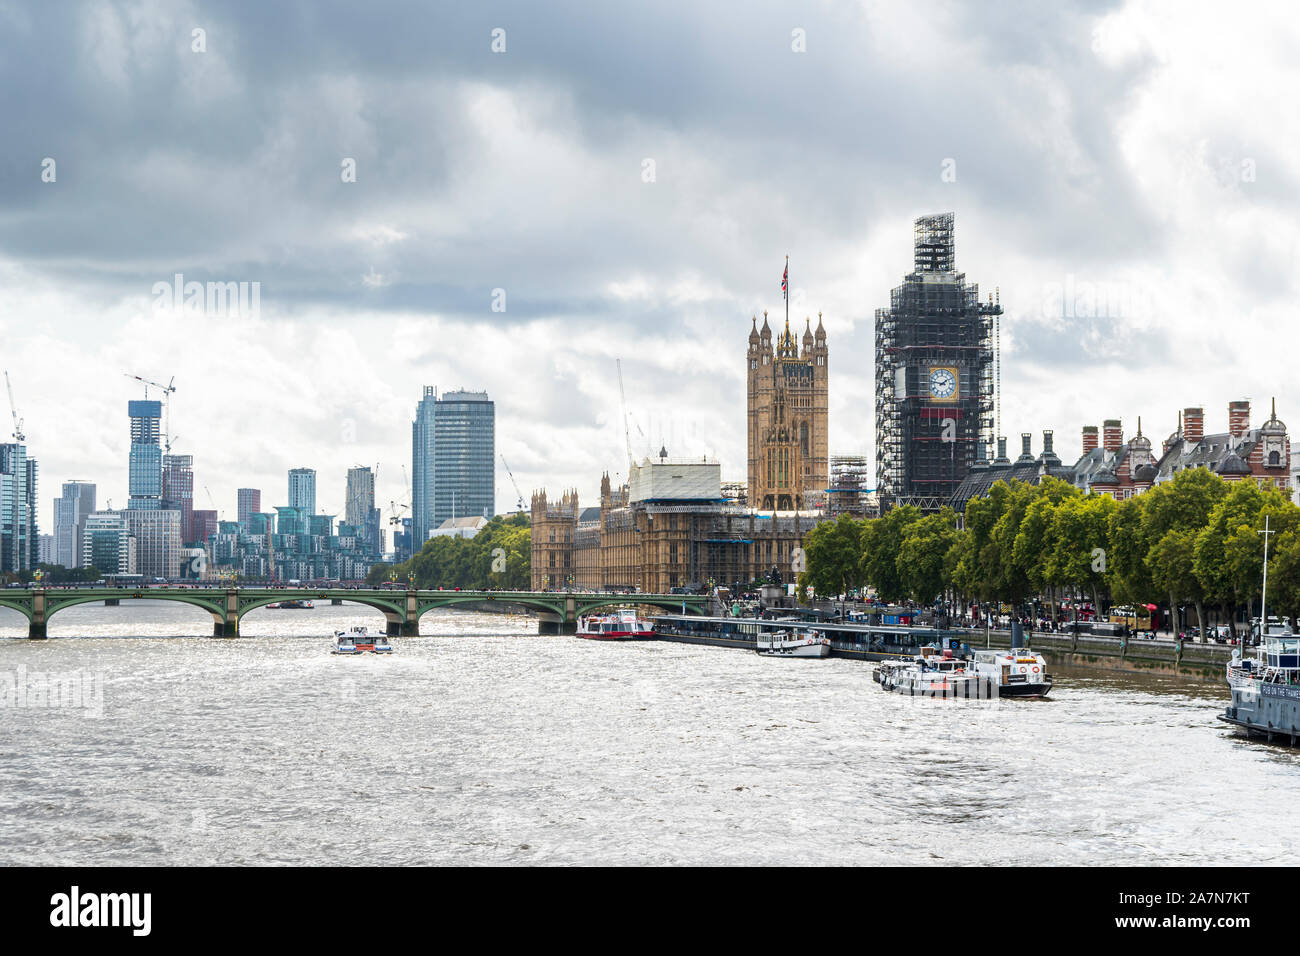 London's Houses of Parliament and the River Thames Stock Photo